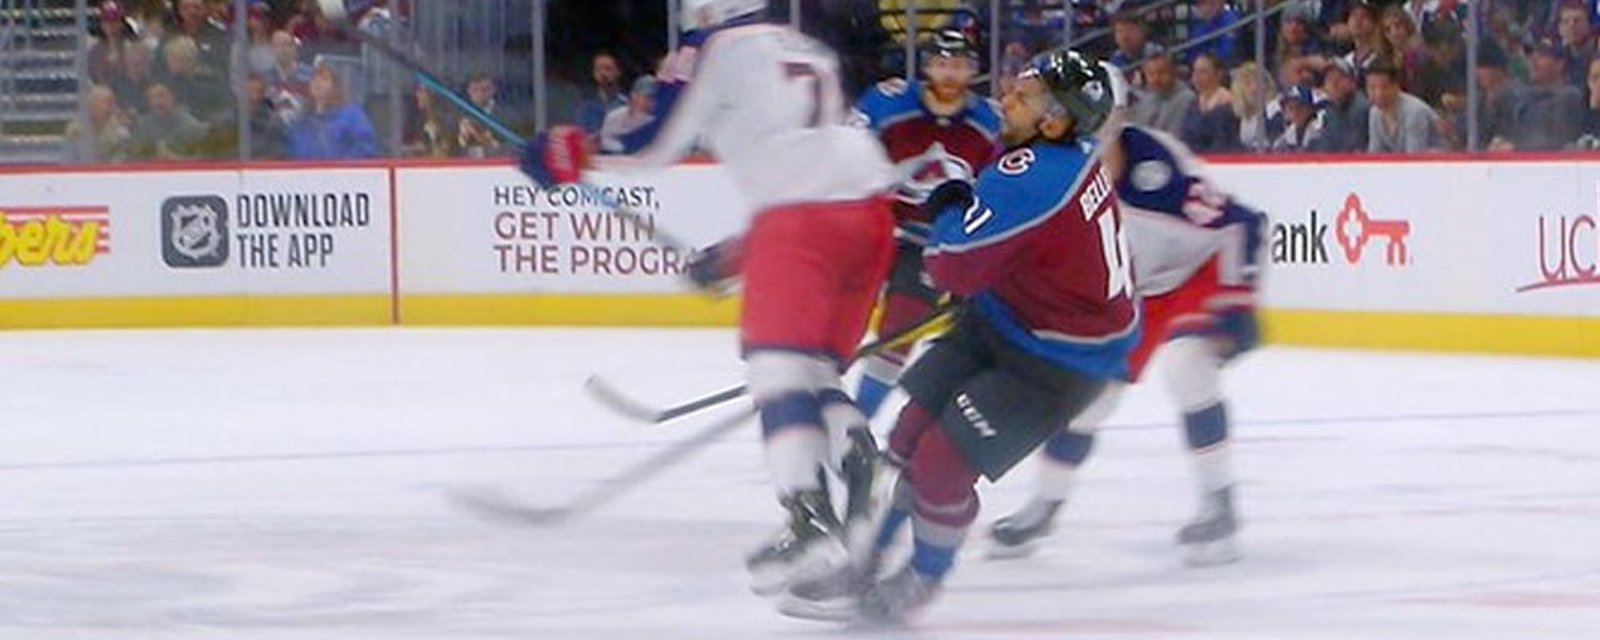 NHL suspends Foligno for elbow on Bellemare